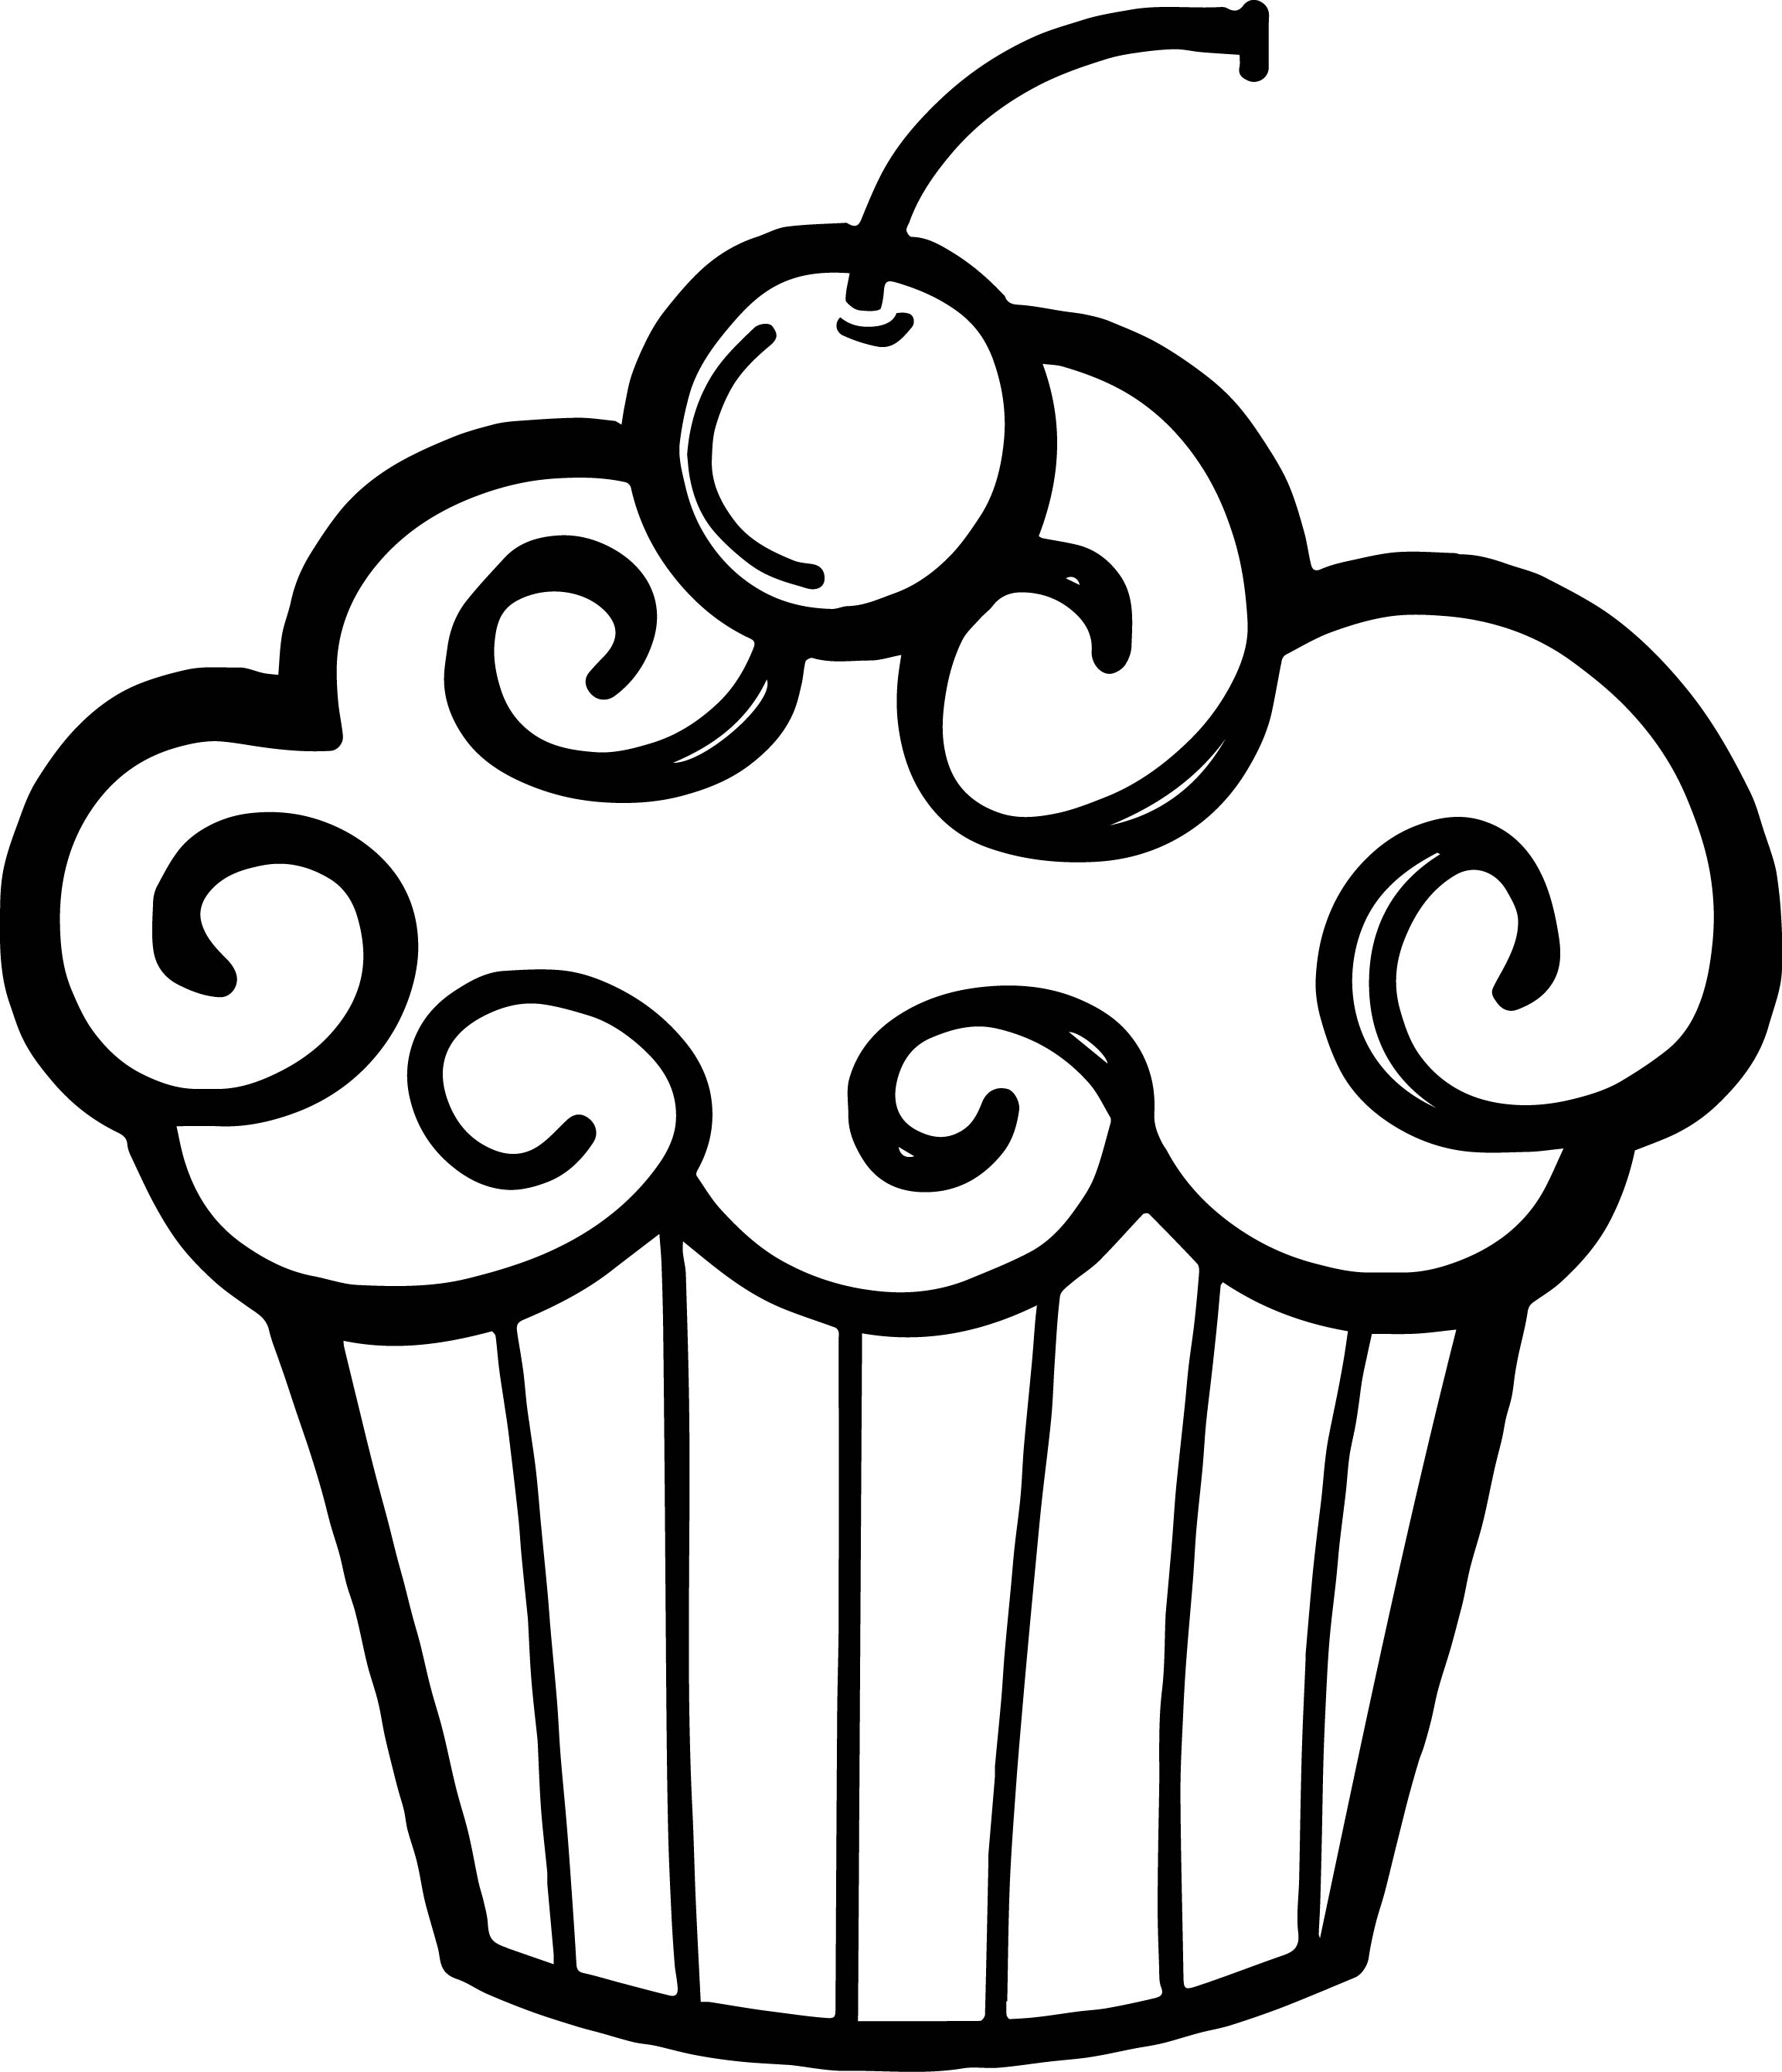 cupcake-black-and-white-image-of-birthday-clipart-black-and-white-happy-wikiclipart